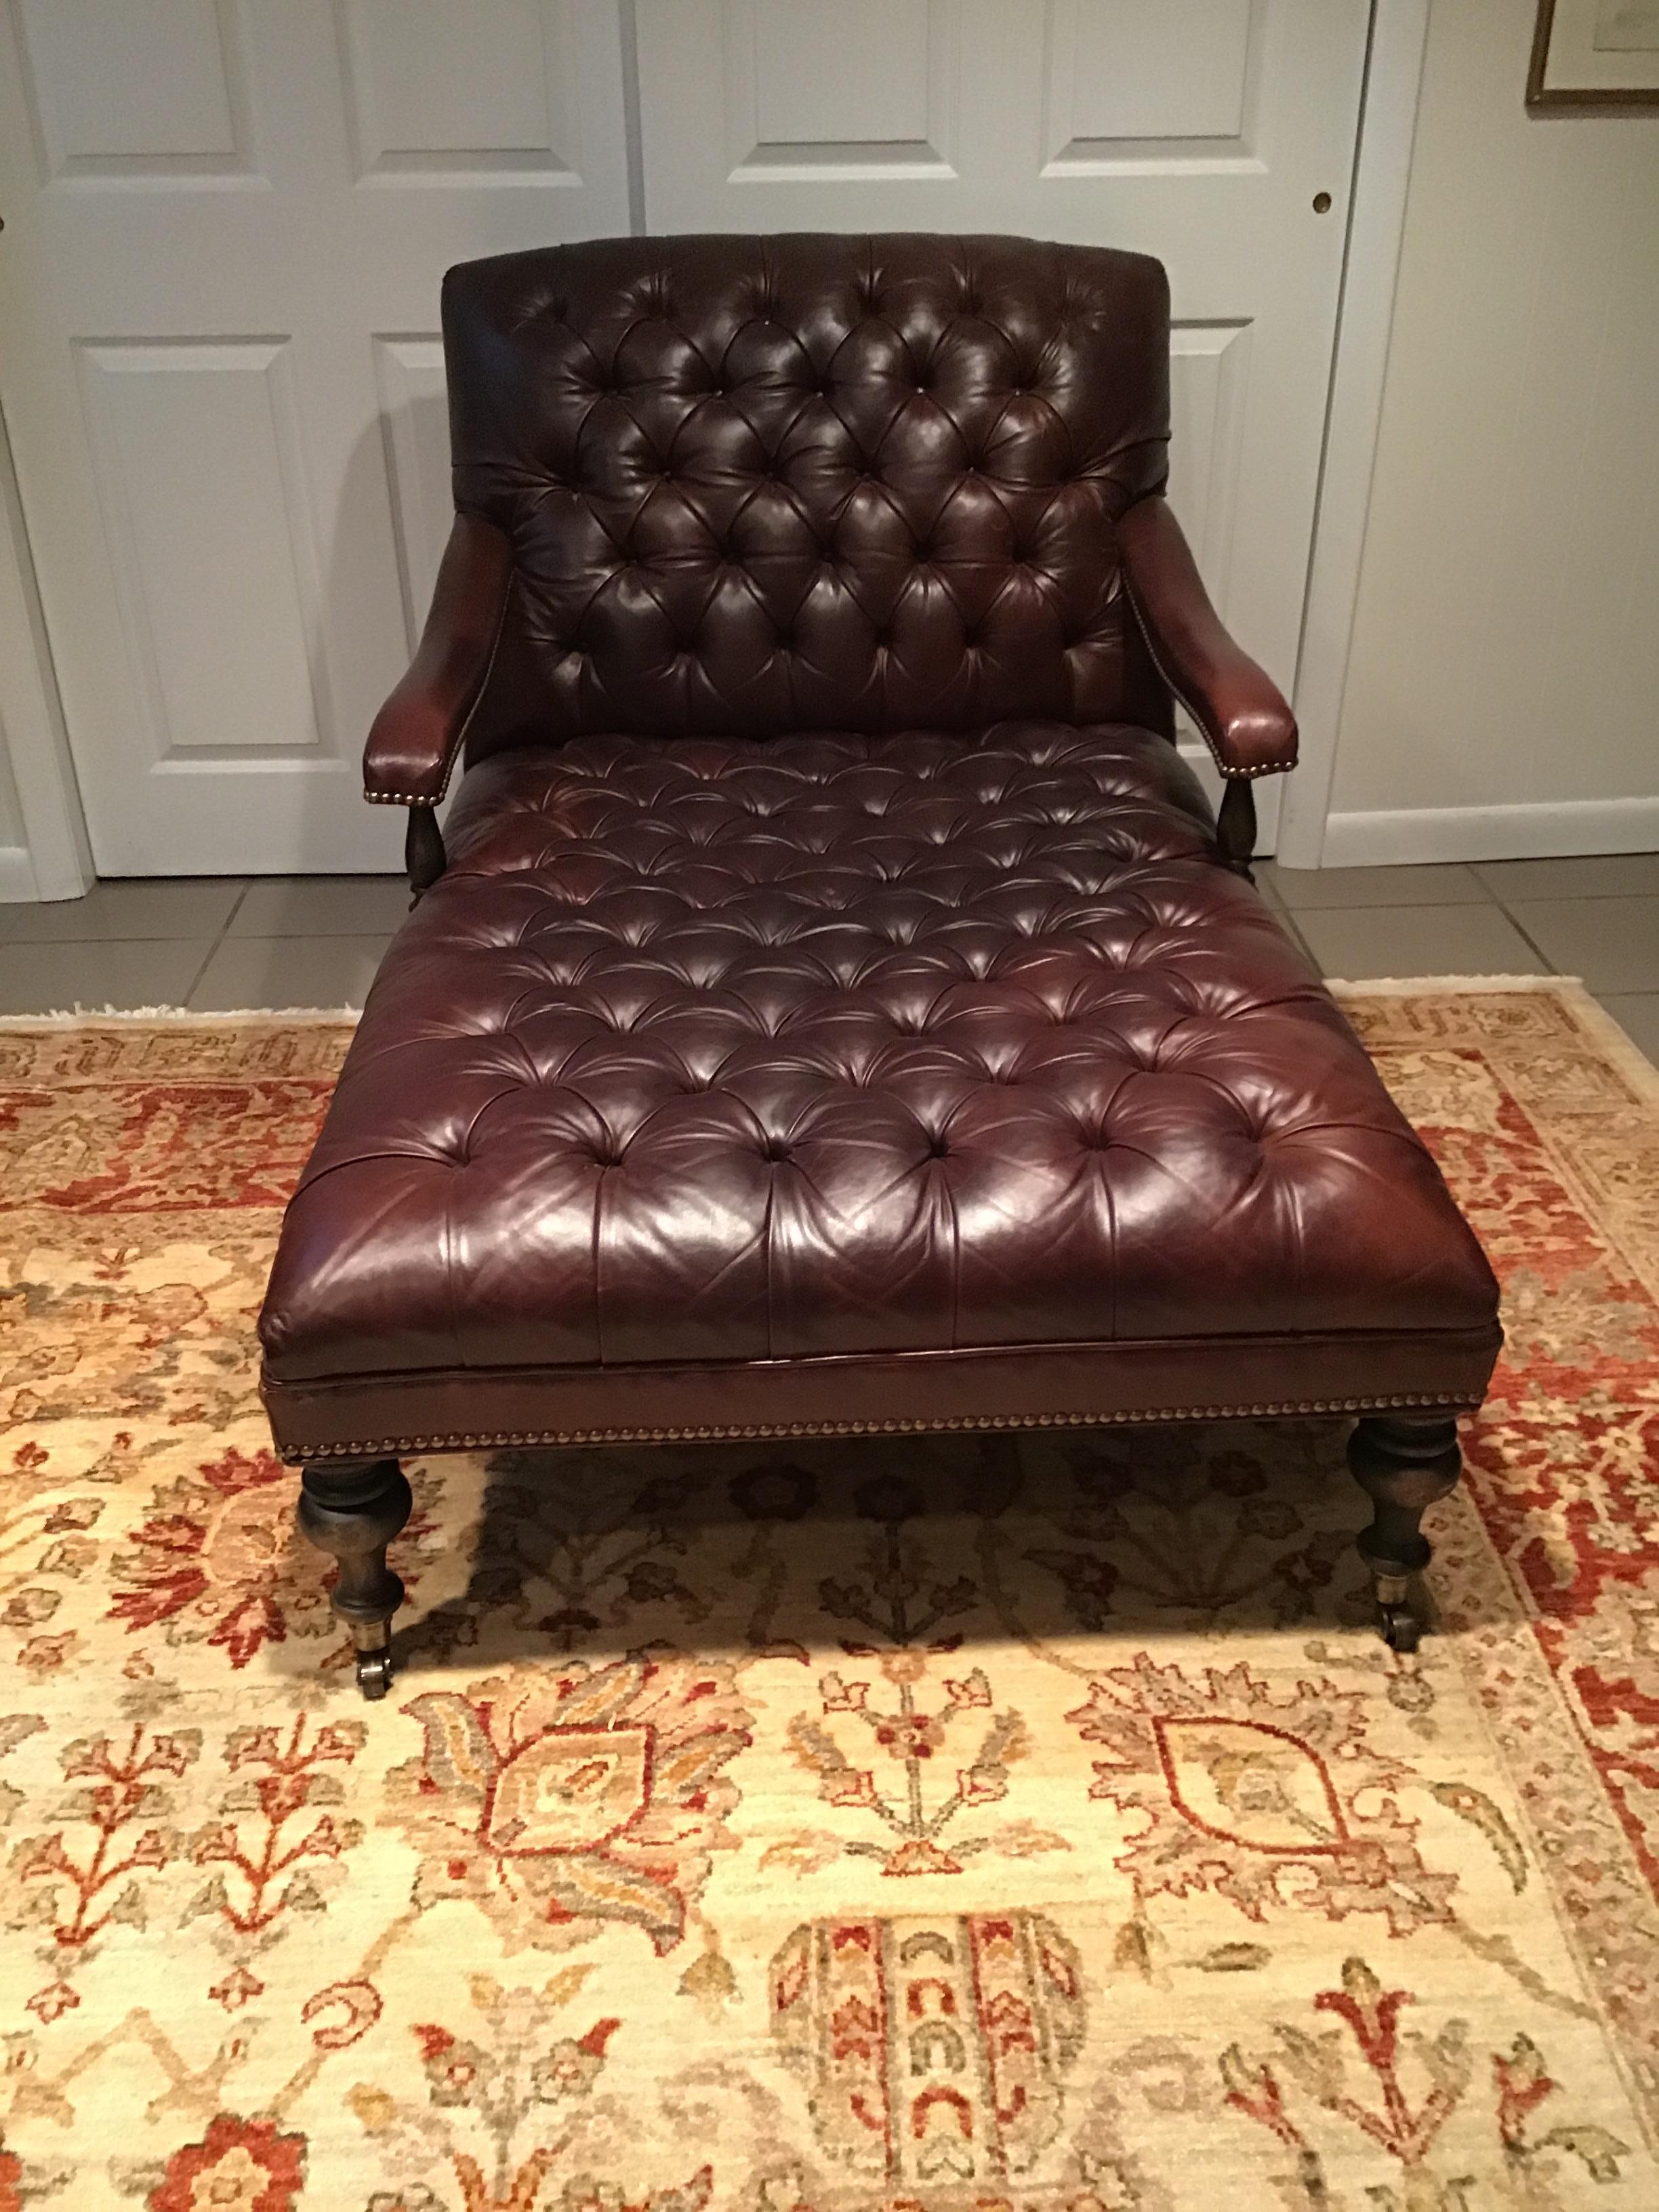 Tufted leather chaise lounge on wood legs with casters.